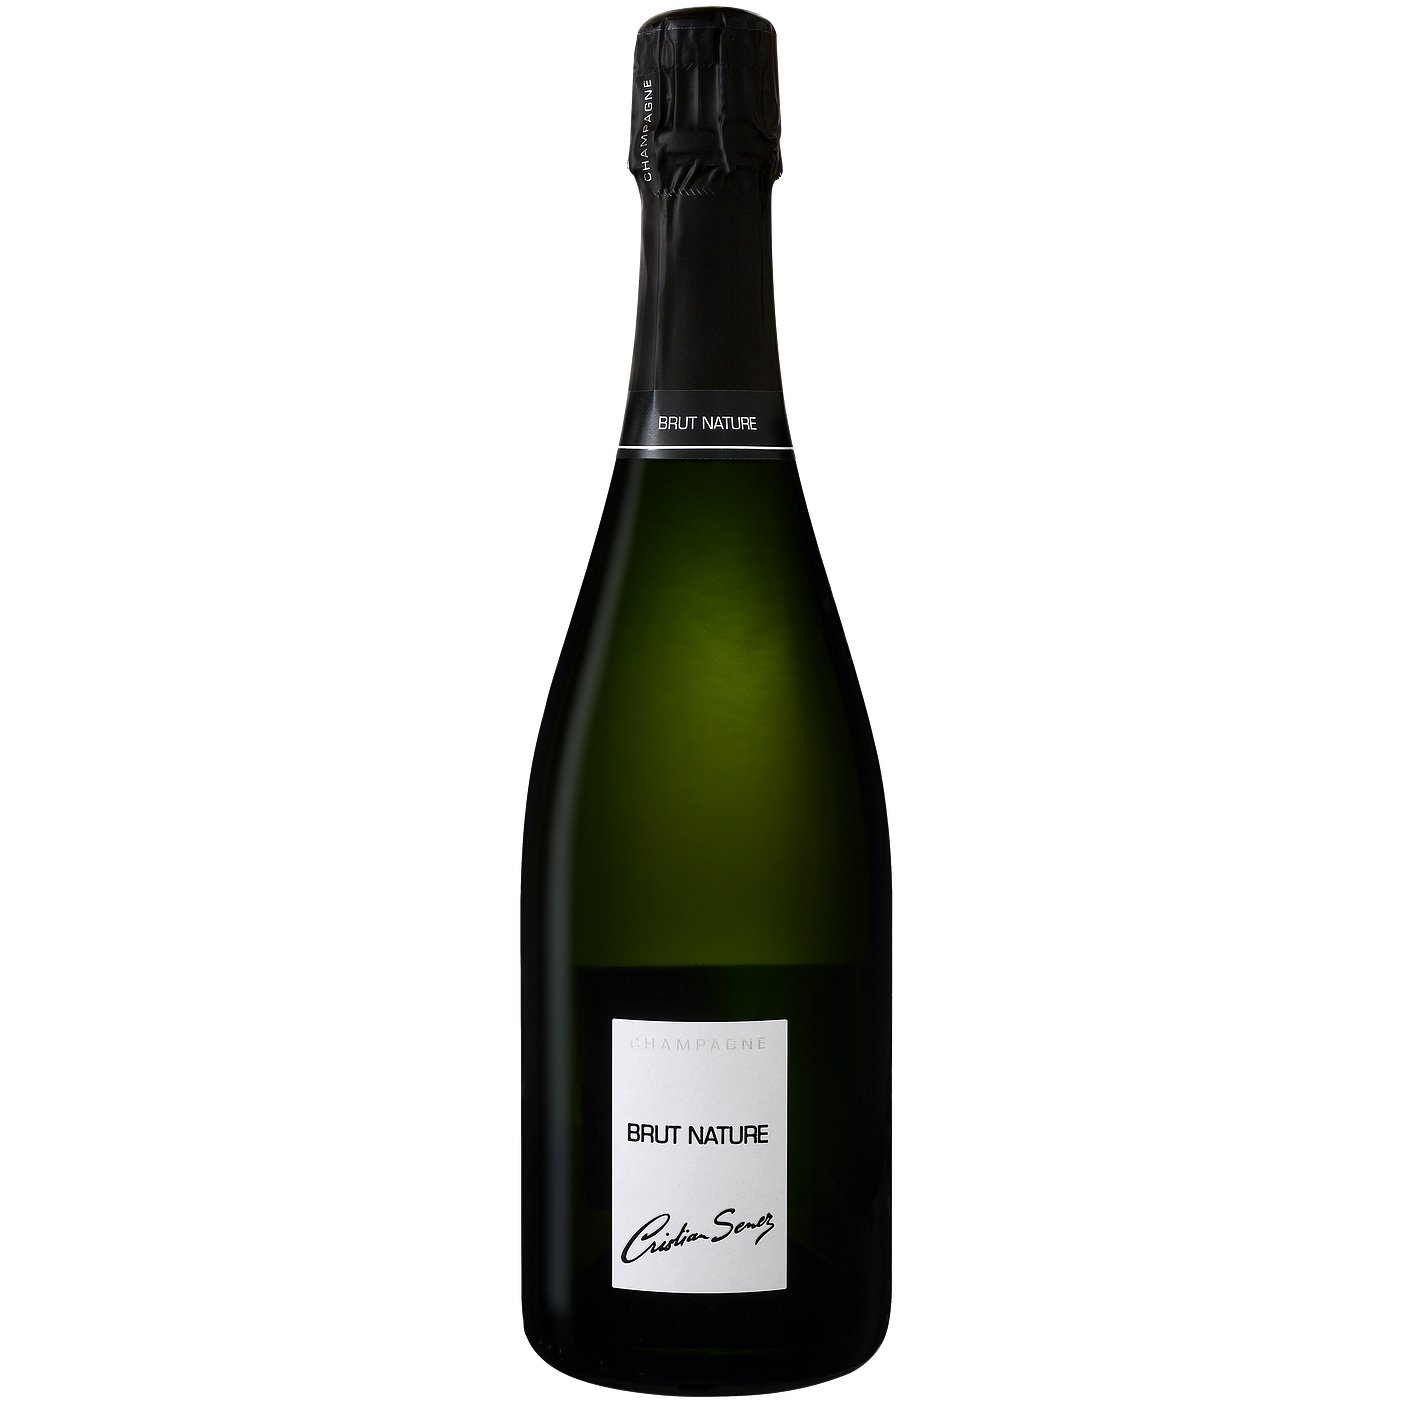 BOUTIQUE CHAMPAGNE & SPARKLING PACK - Boutique Wine and Champagne